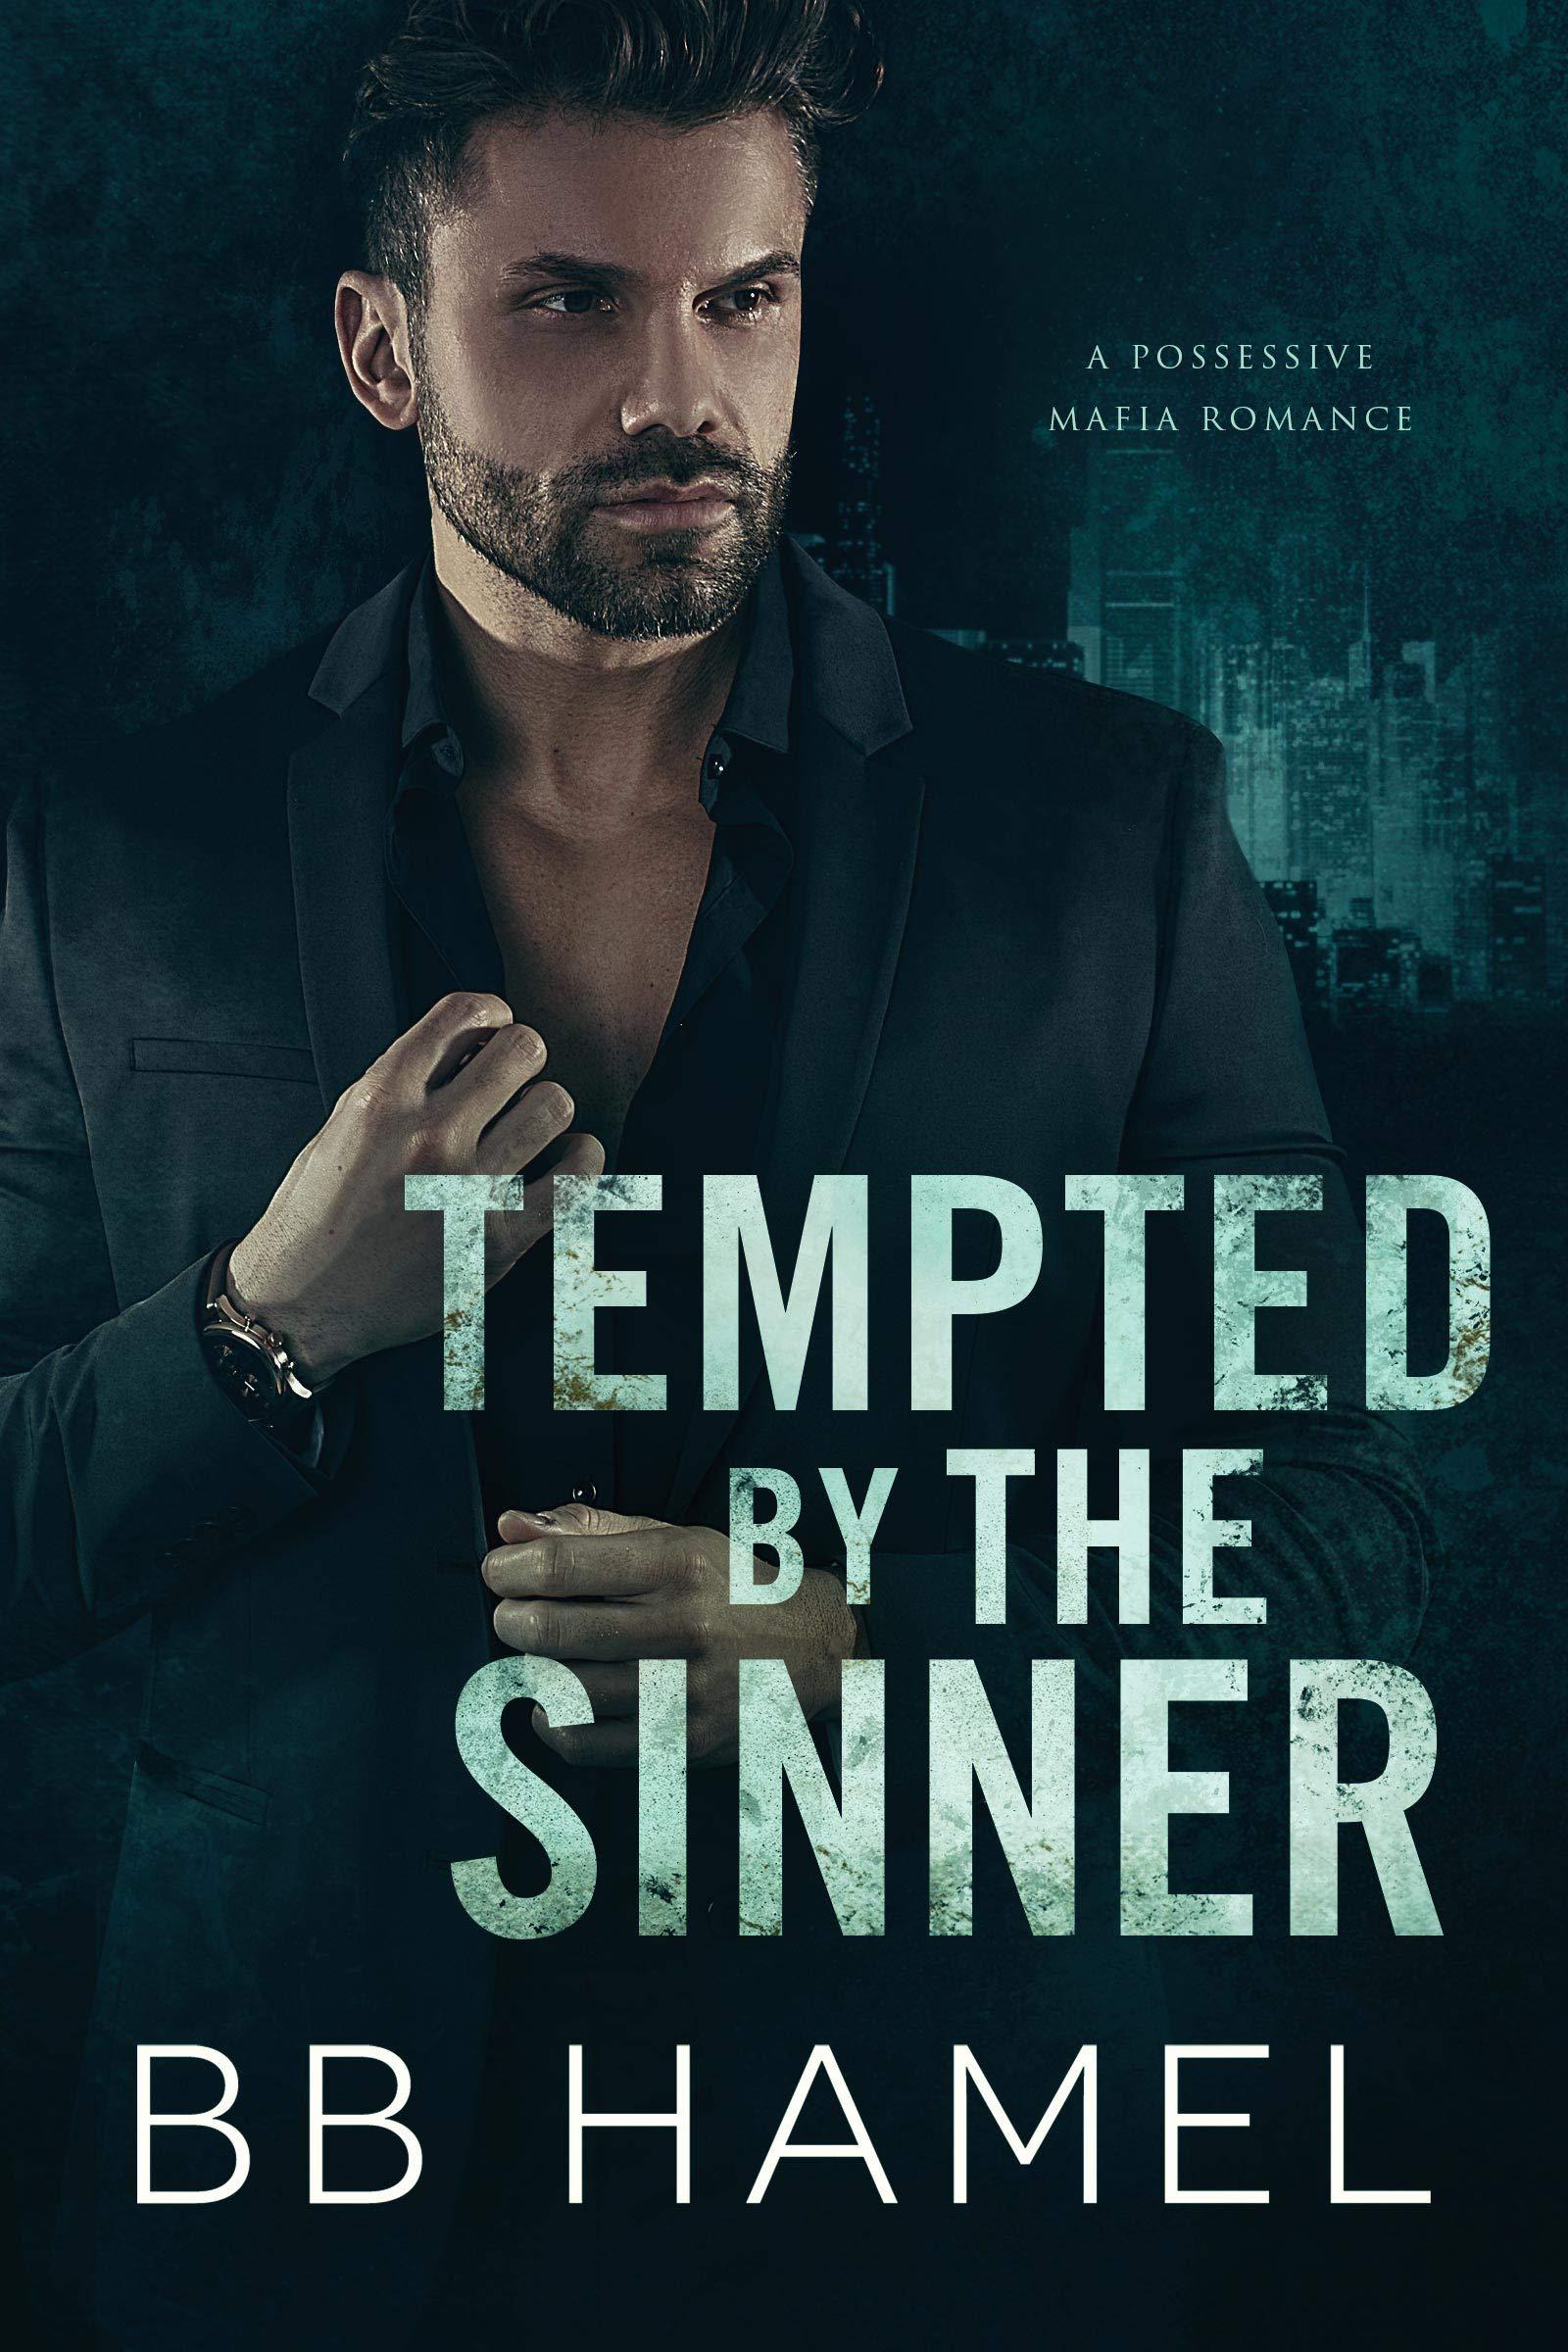 Tempted by the Sinner